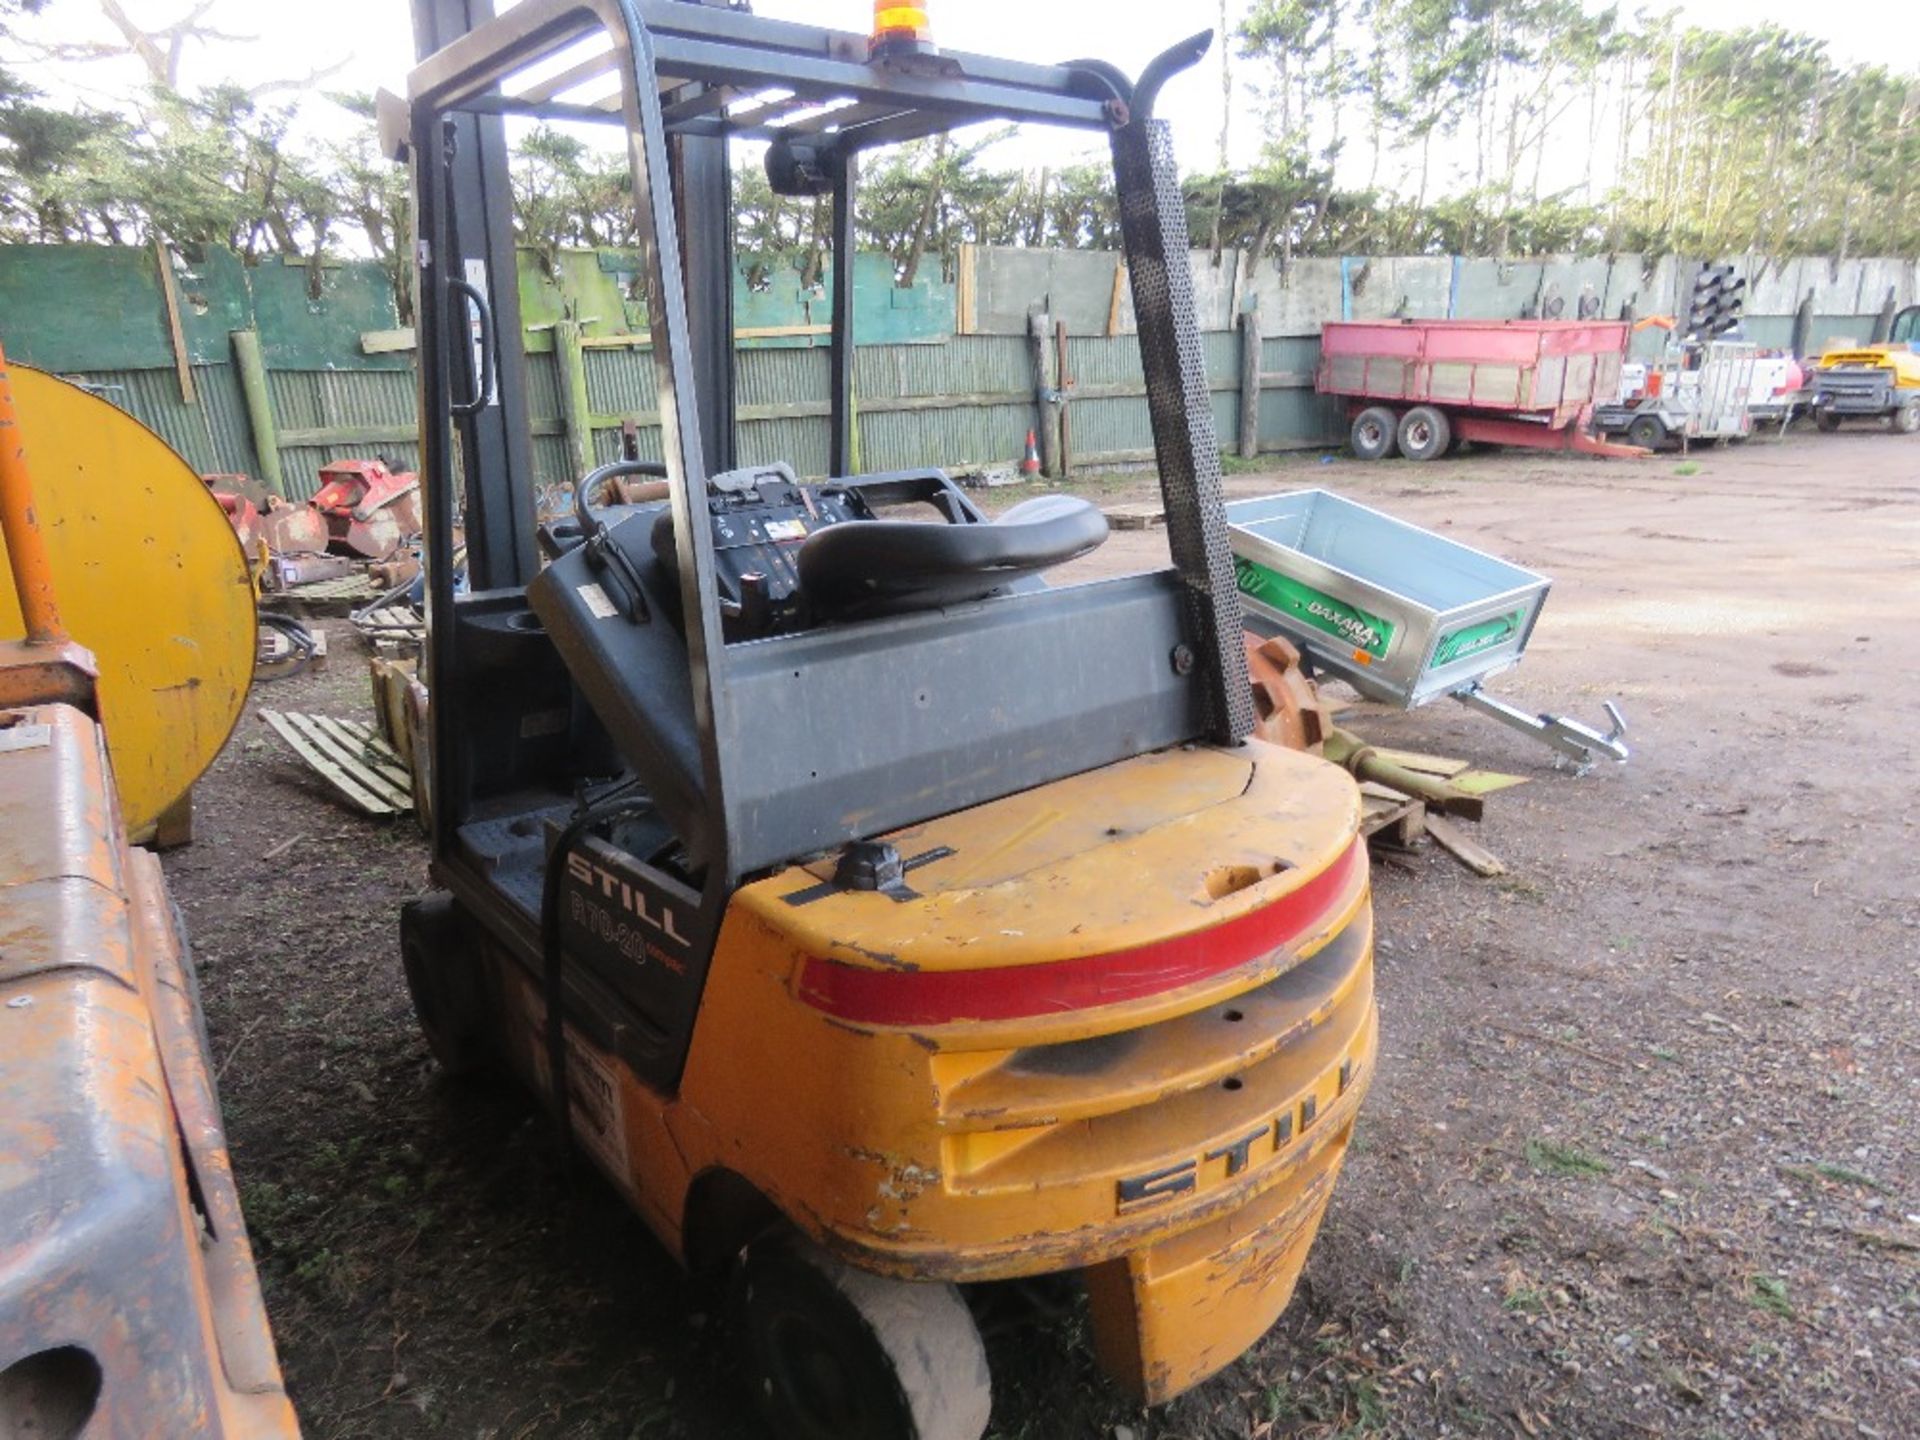 STILL R70-20 COMPACT DIESEL ENGINED FORKLIFT, SN:076001217. WEN TESTED WAS SEEN TO START, RUN AND LI - Image 4 of 6